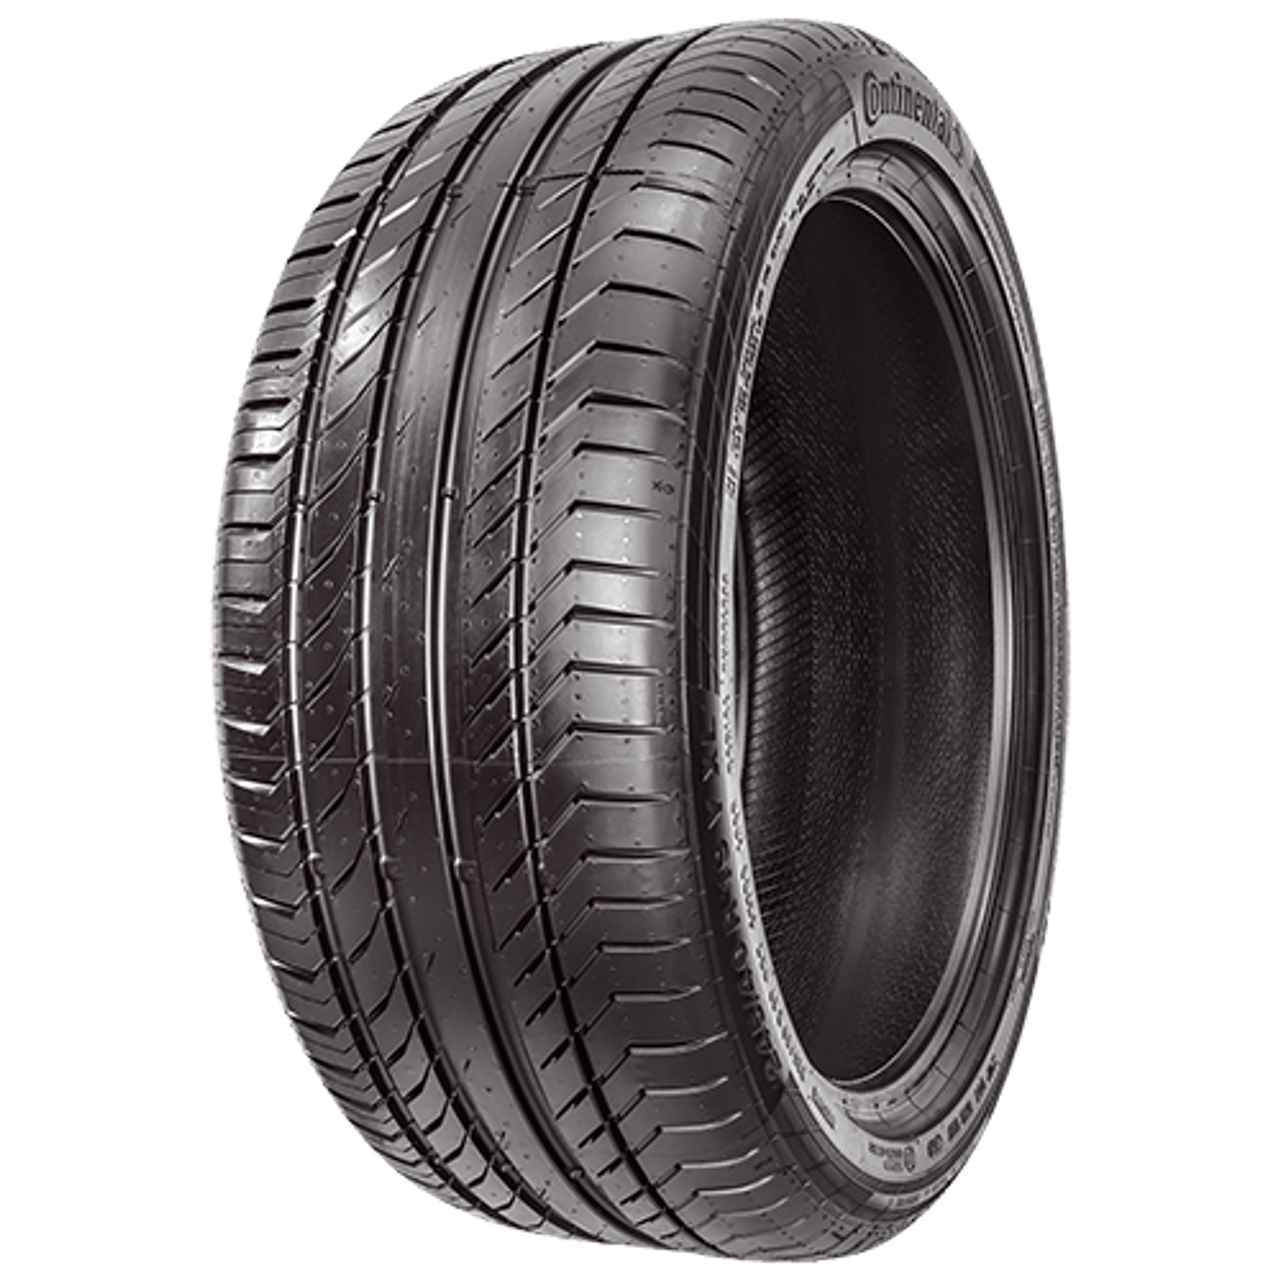 CONTINENTAL CONTISPORTCONTACT 5 (J) 245/45R18 100W FR